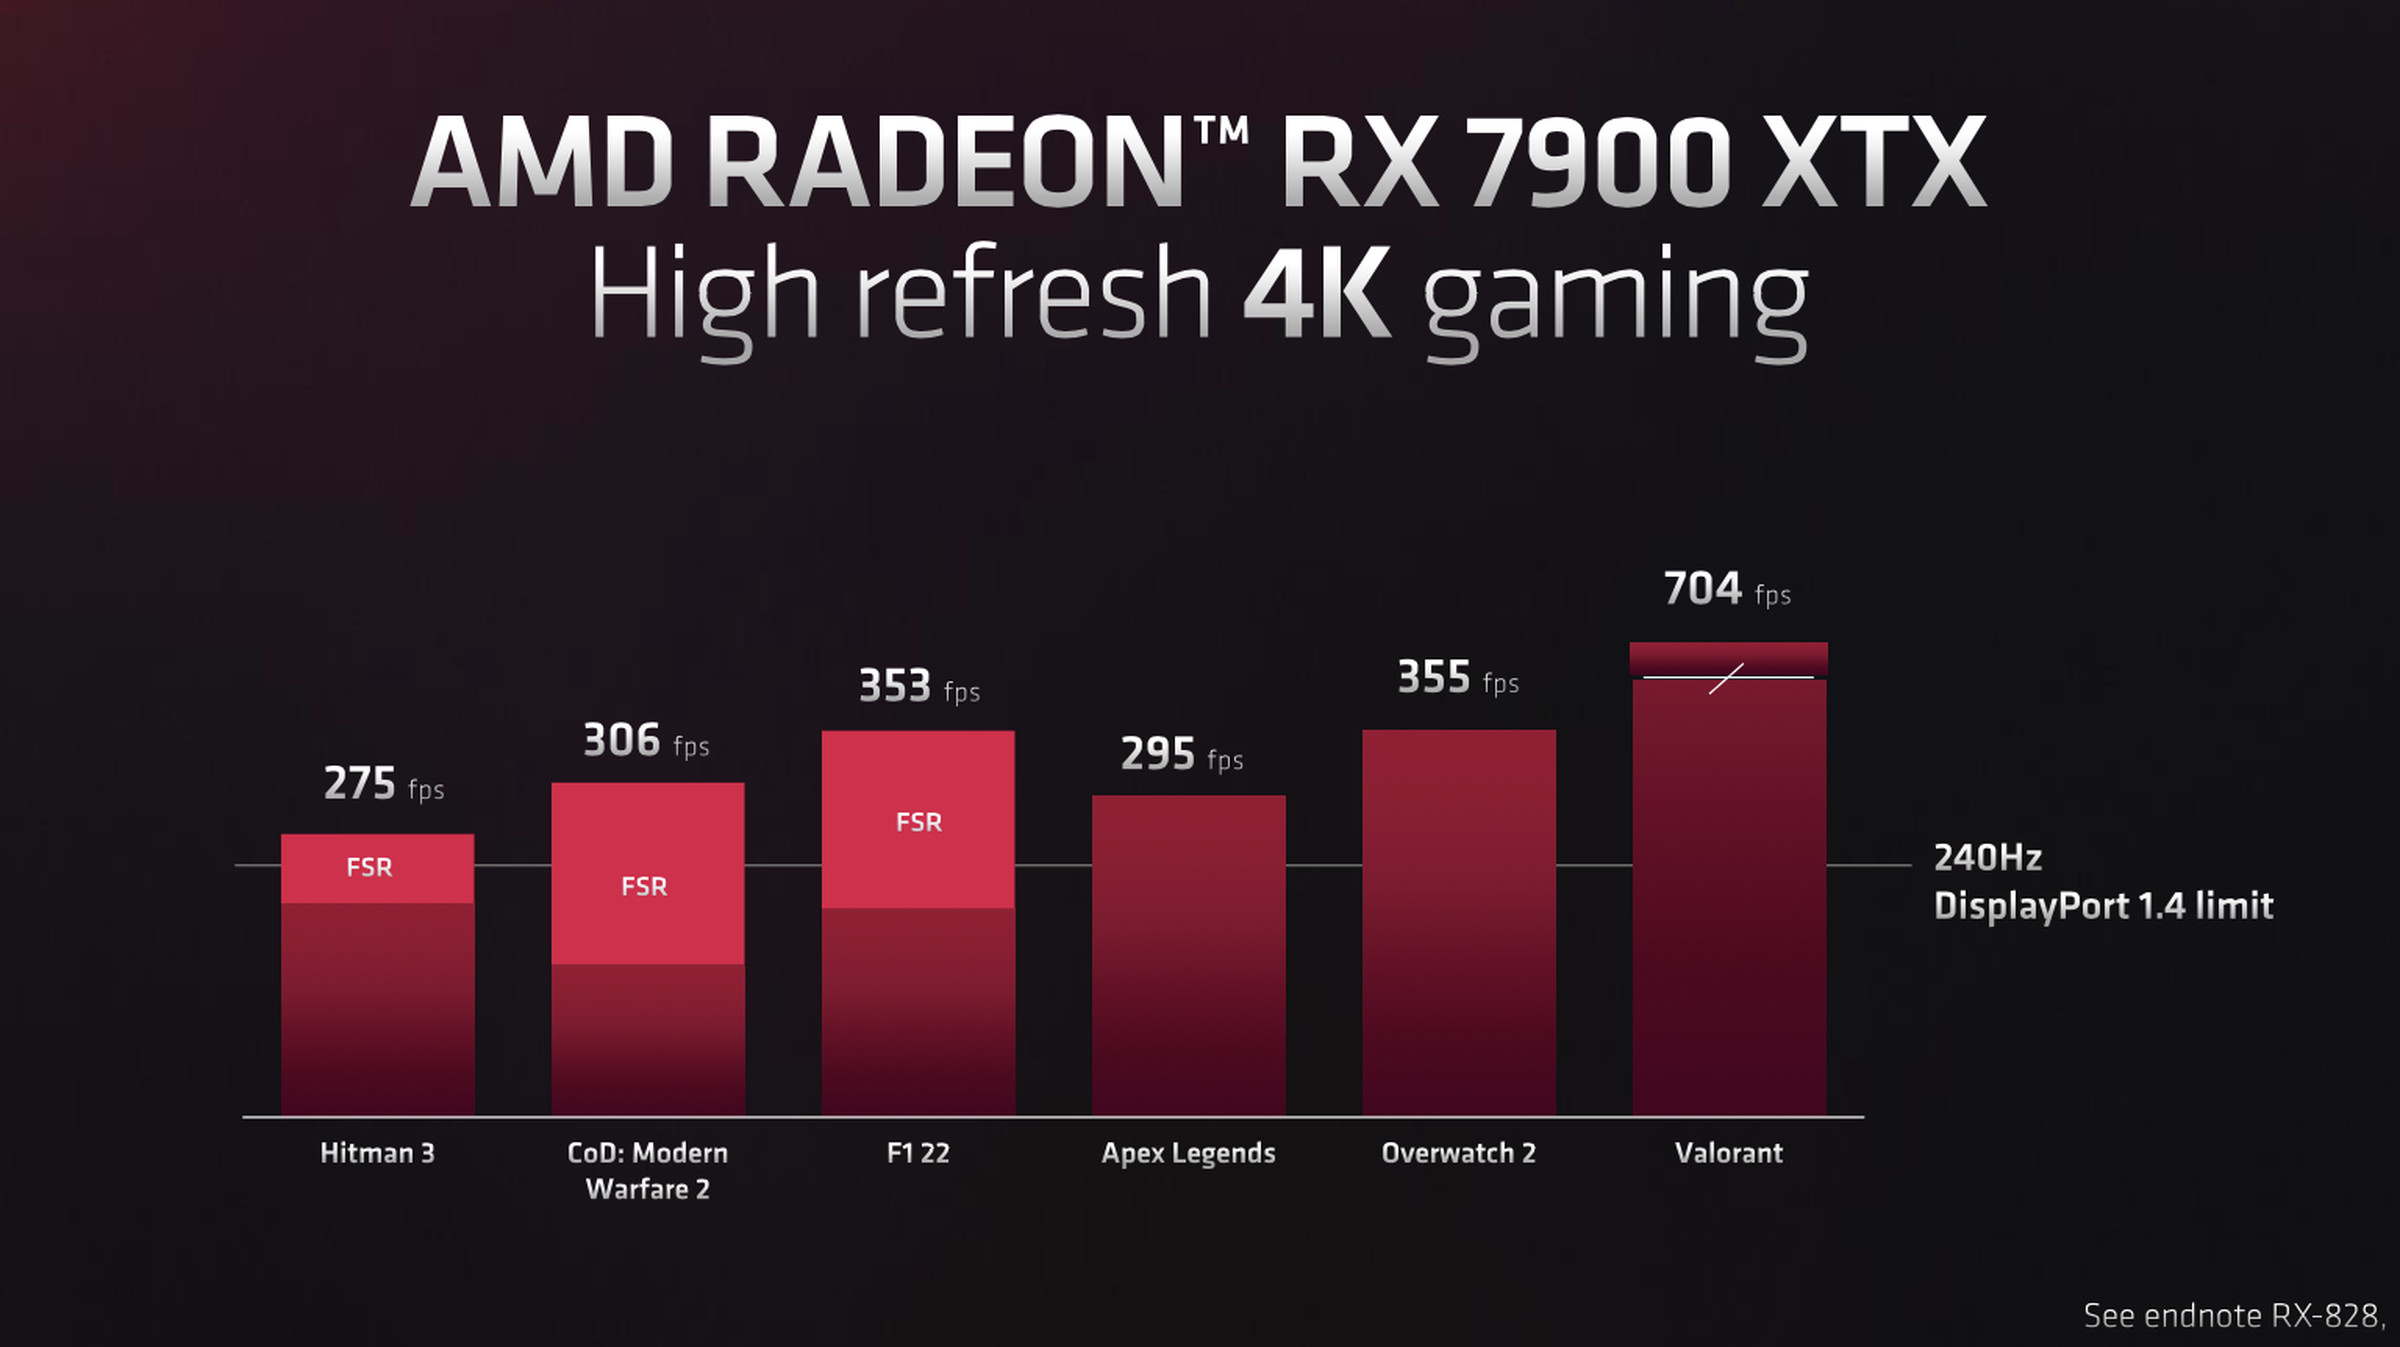 Chart showing the RX 7900 XTX’s “High refresh 4K gaming performance.” Hitman 2 gets 275 fps with FSR, CoD: Modern Warfare 2 gets 306 fps with FSR, F1 22 gets 353 fps with FSR.